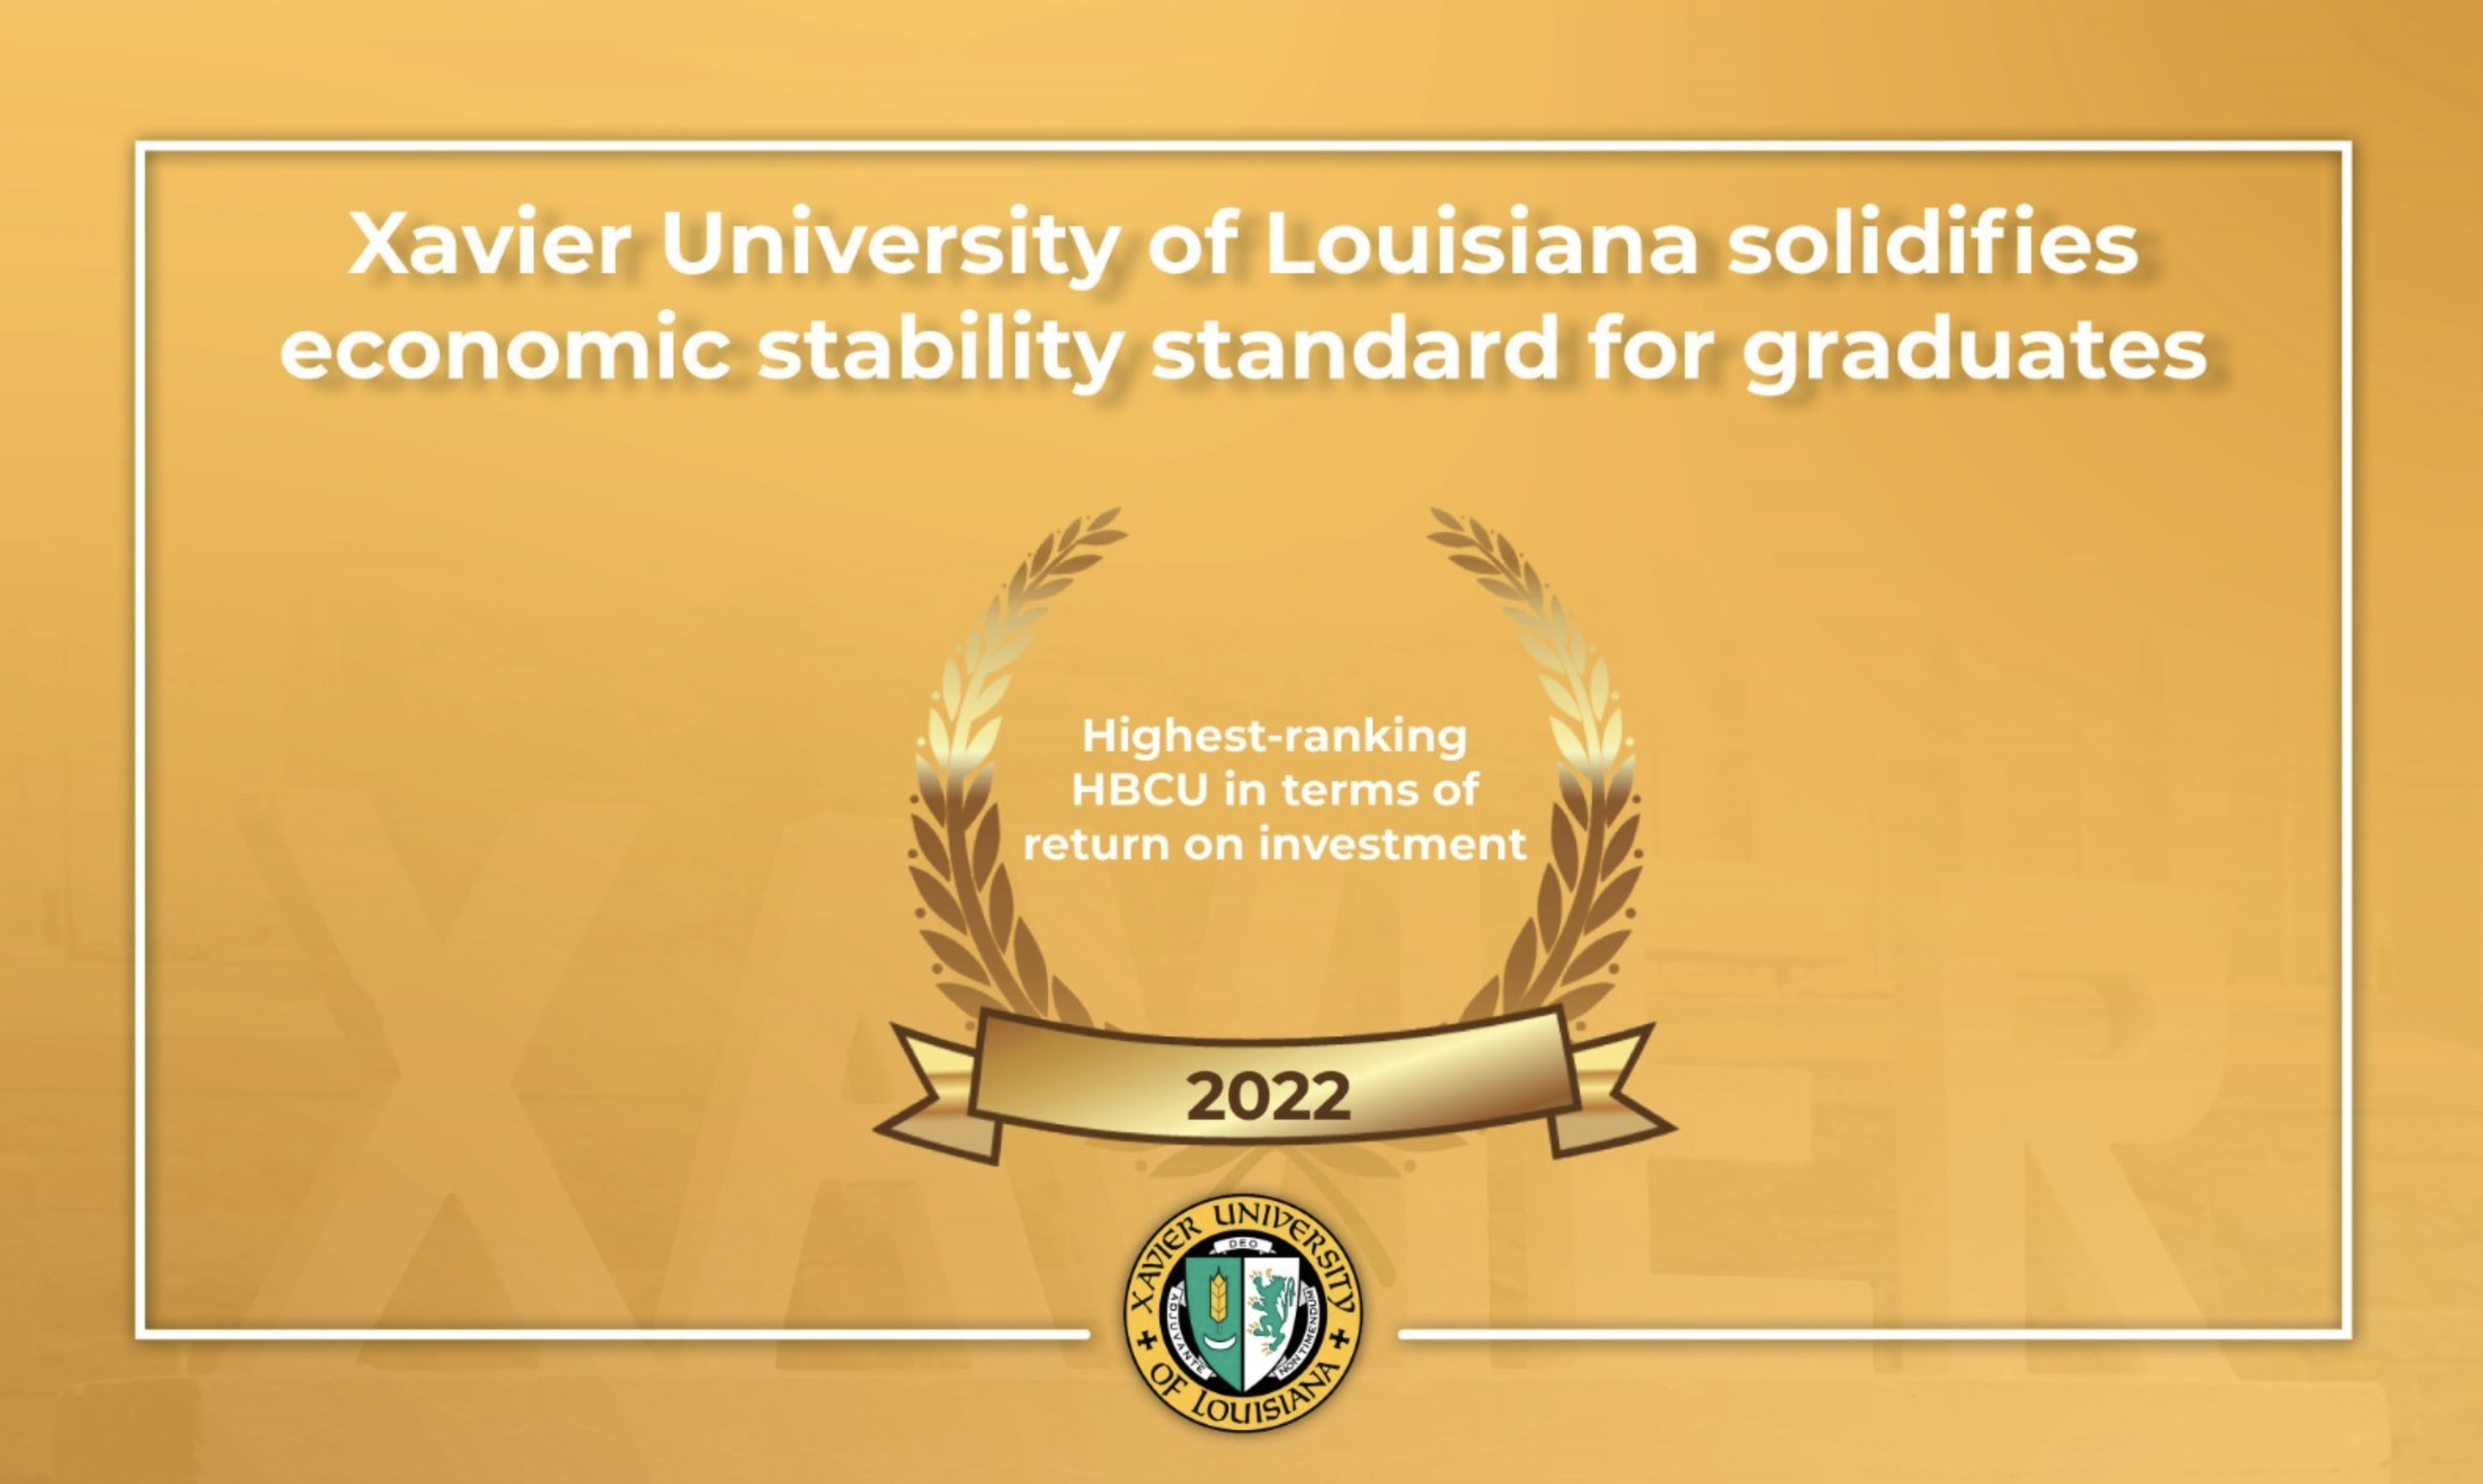 Xavier University of Louisiana named the highest-ranking HBCU in terms of Return on Investment